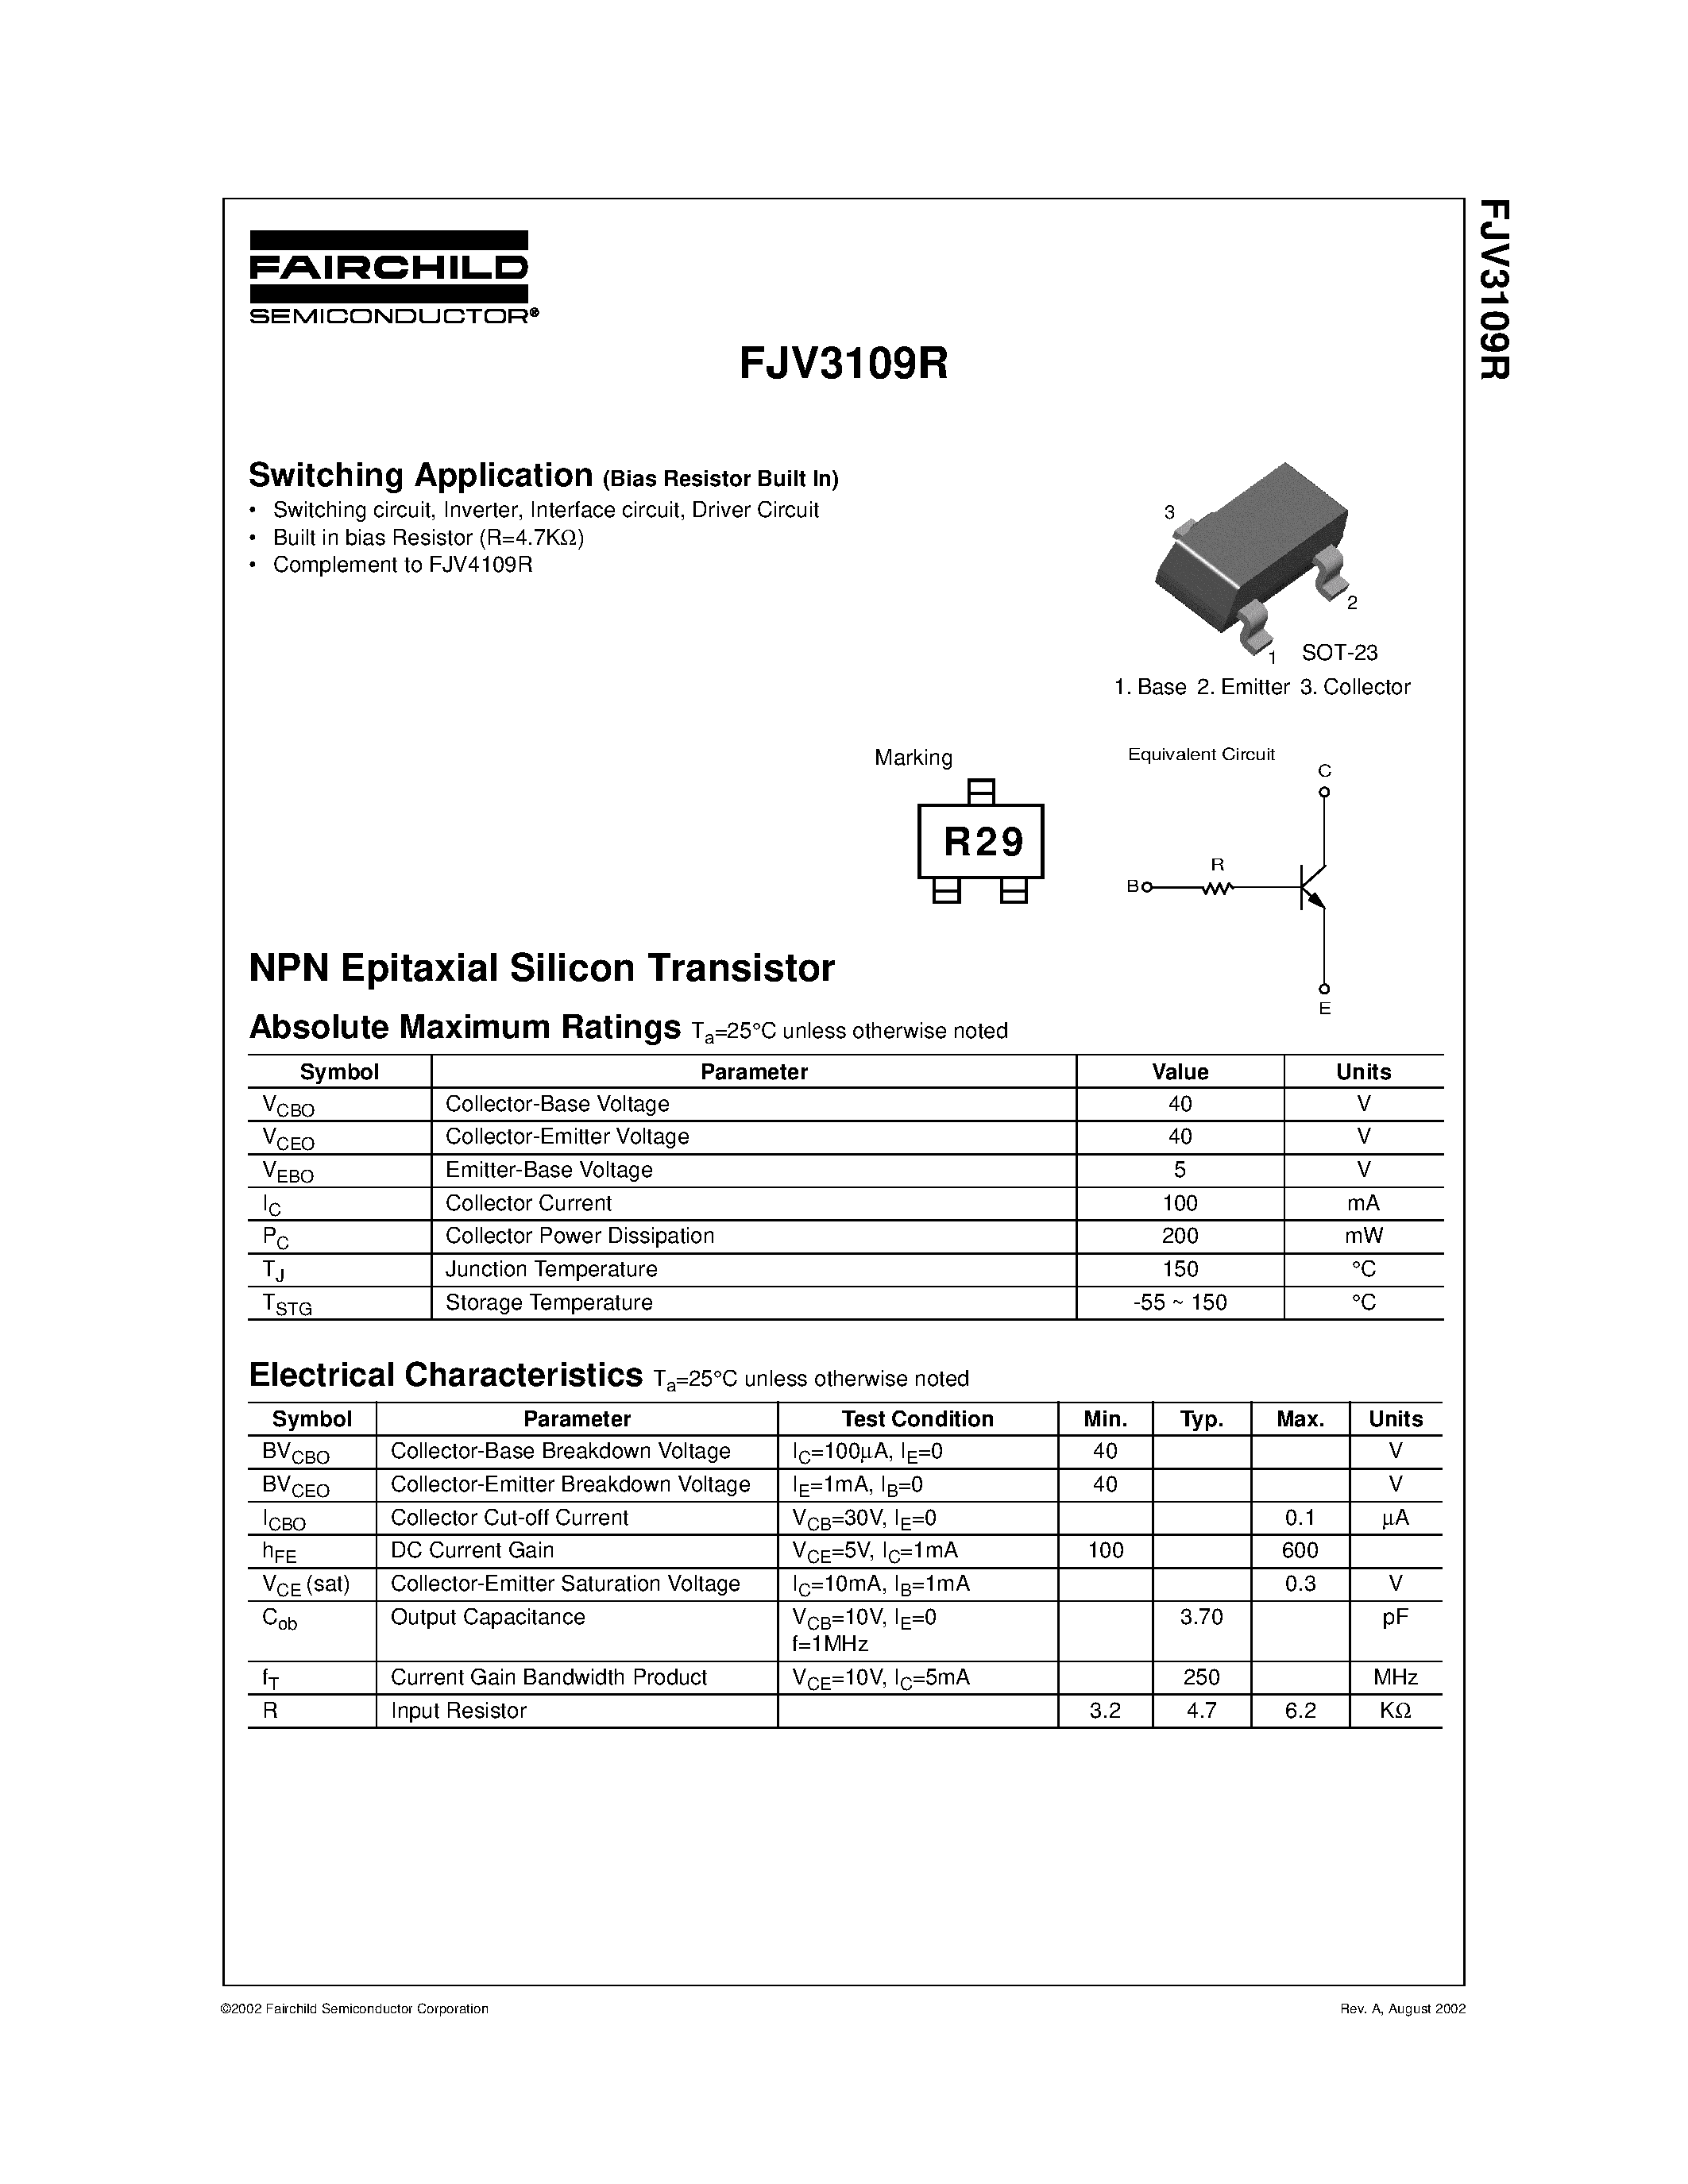 Даташит FJV3109R-NPN Epitaxial Silicon Transistor страница 1